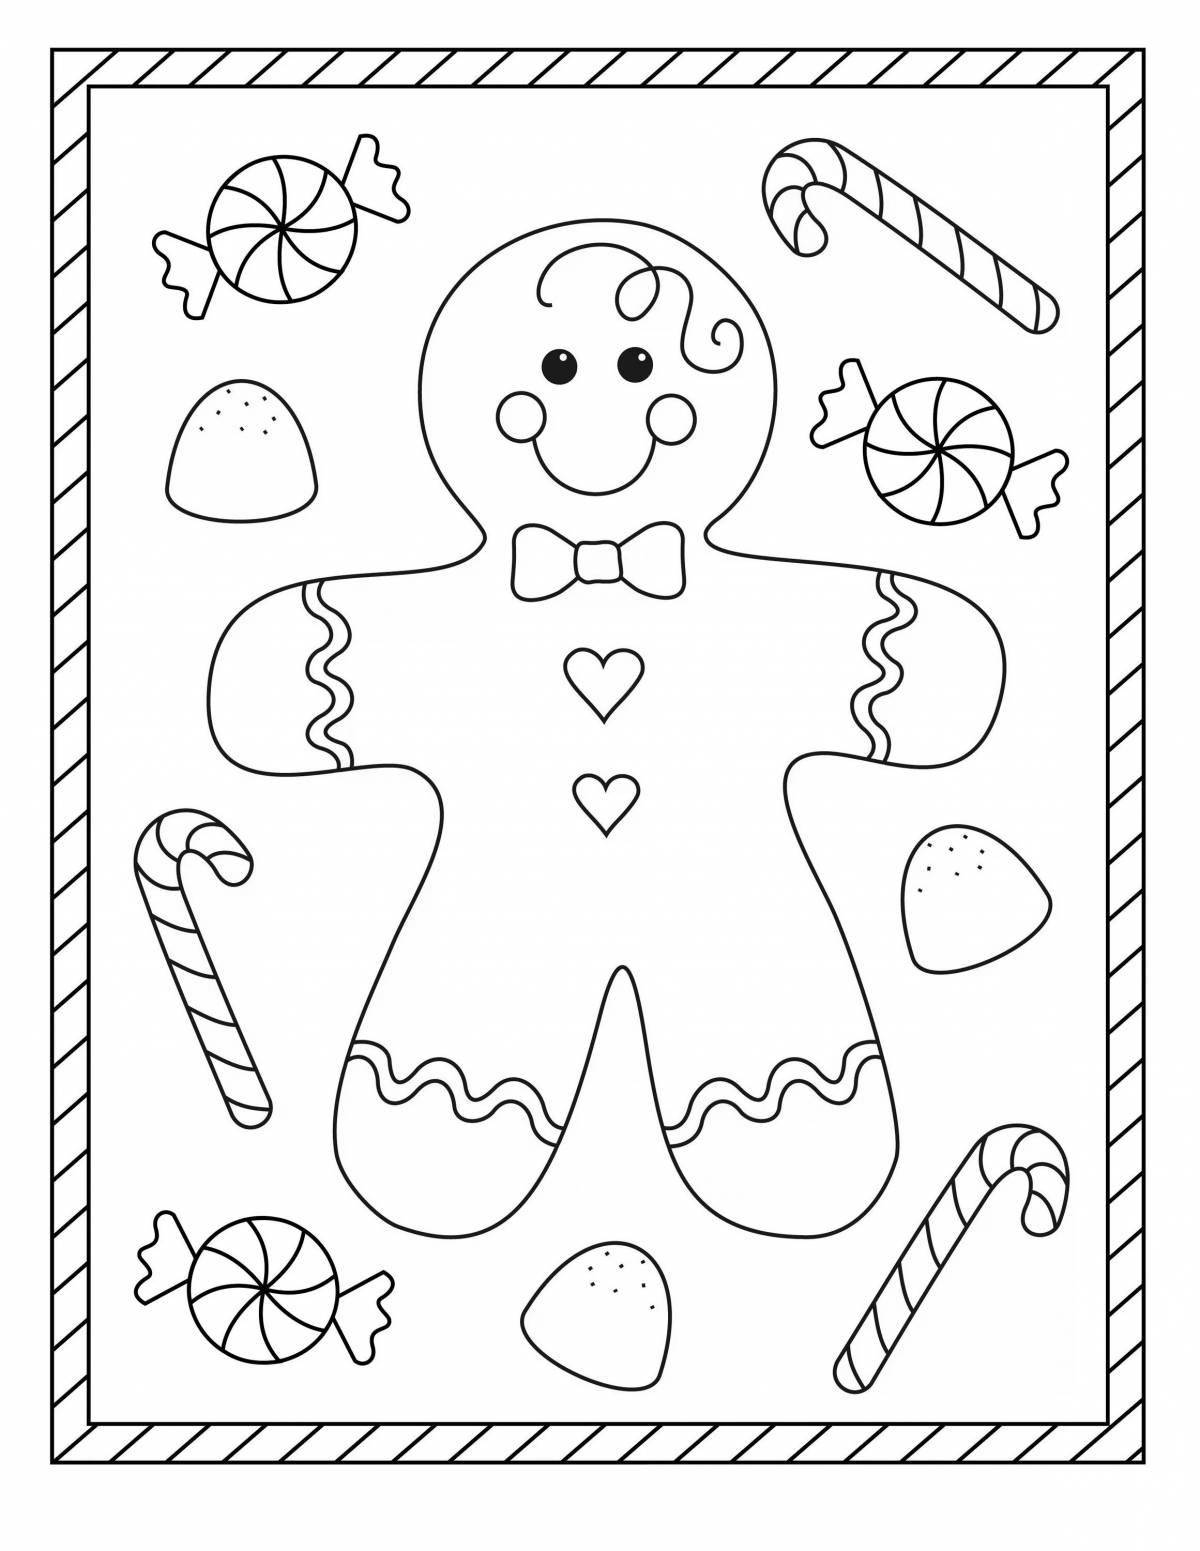 Merry Christmas gingerbread coloring pages